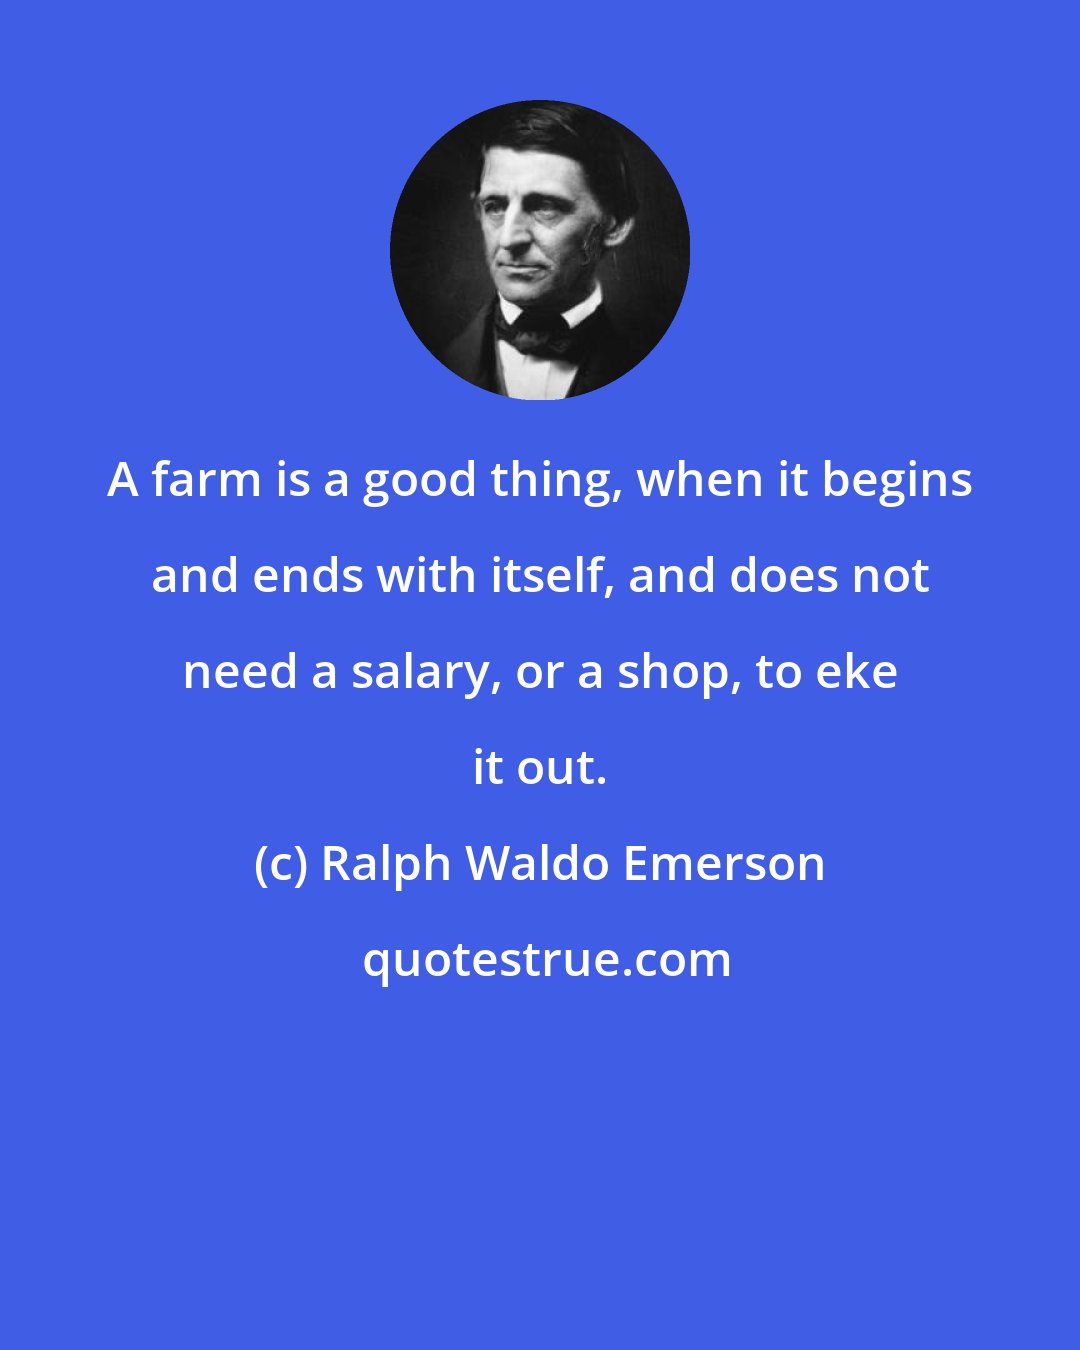 Ralph Waldo Emerson: A farm is a good thing, when it begins and ends with itself, and does not need a salary, or a shop, to eke it out.